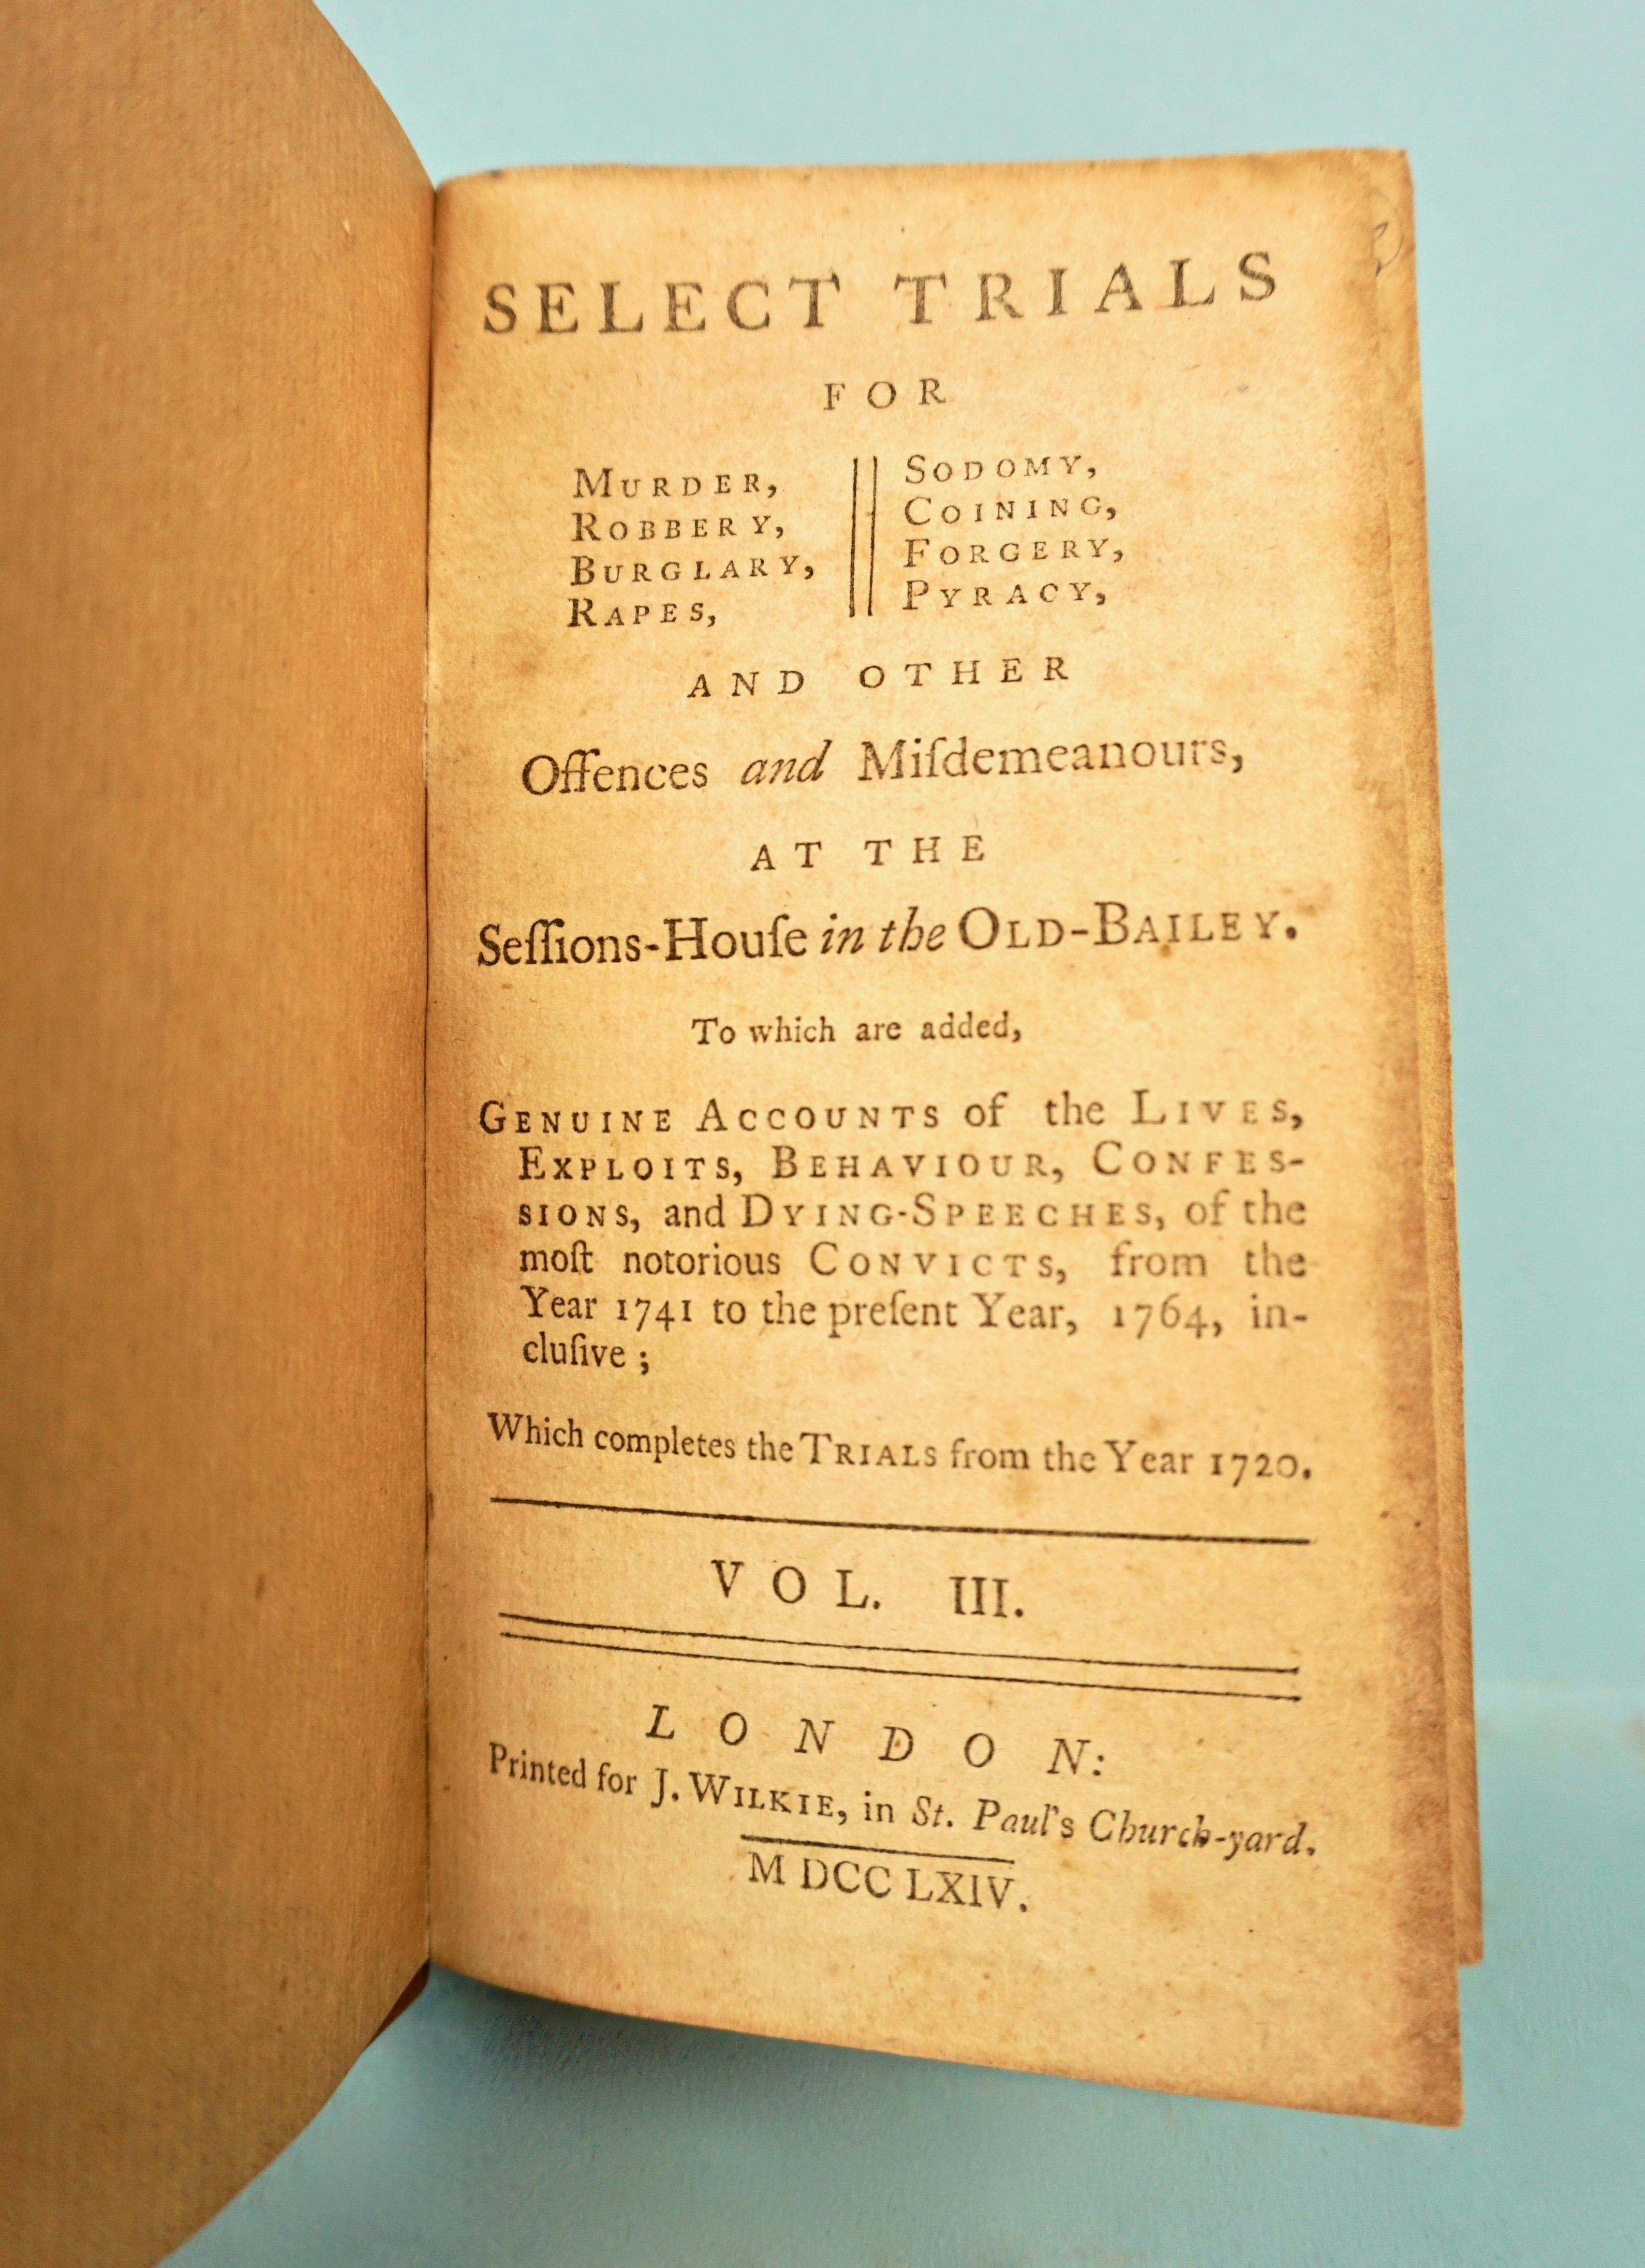 Select Trials for Murder, Robbery, Burglary, Coining Etc, . London, 1740-1764 5